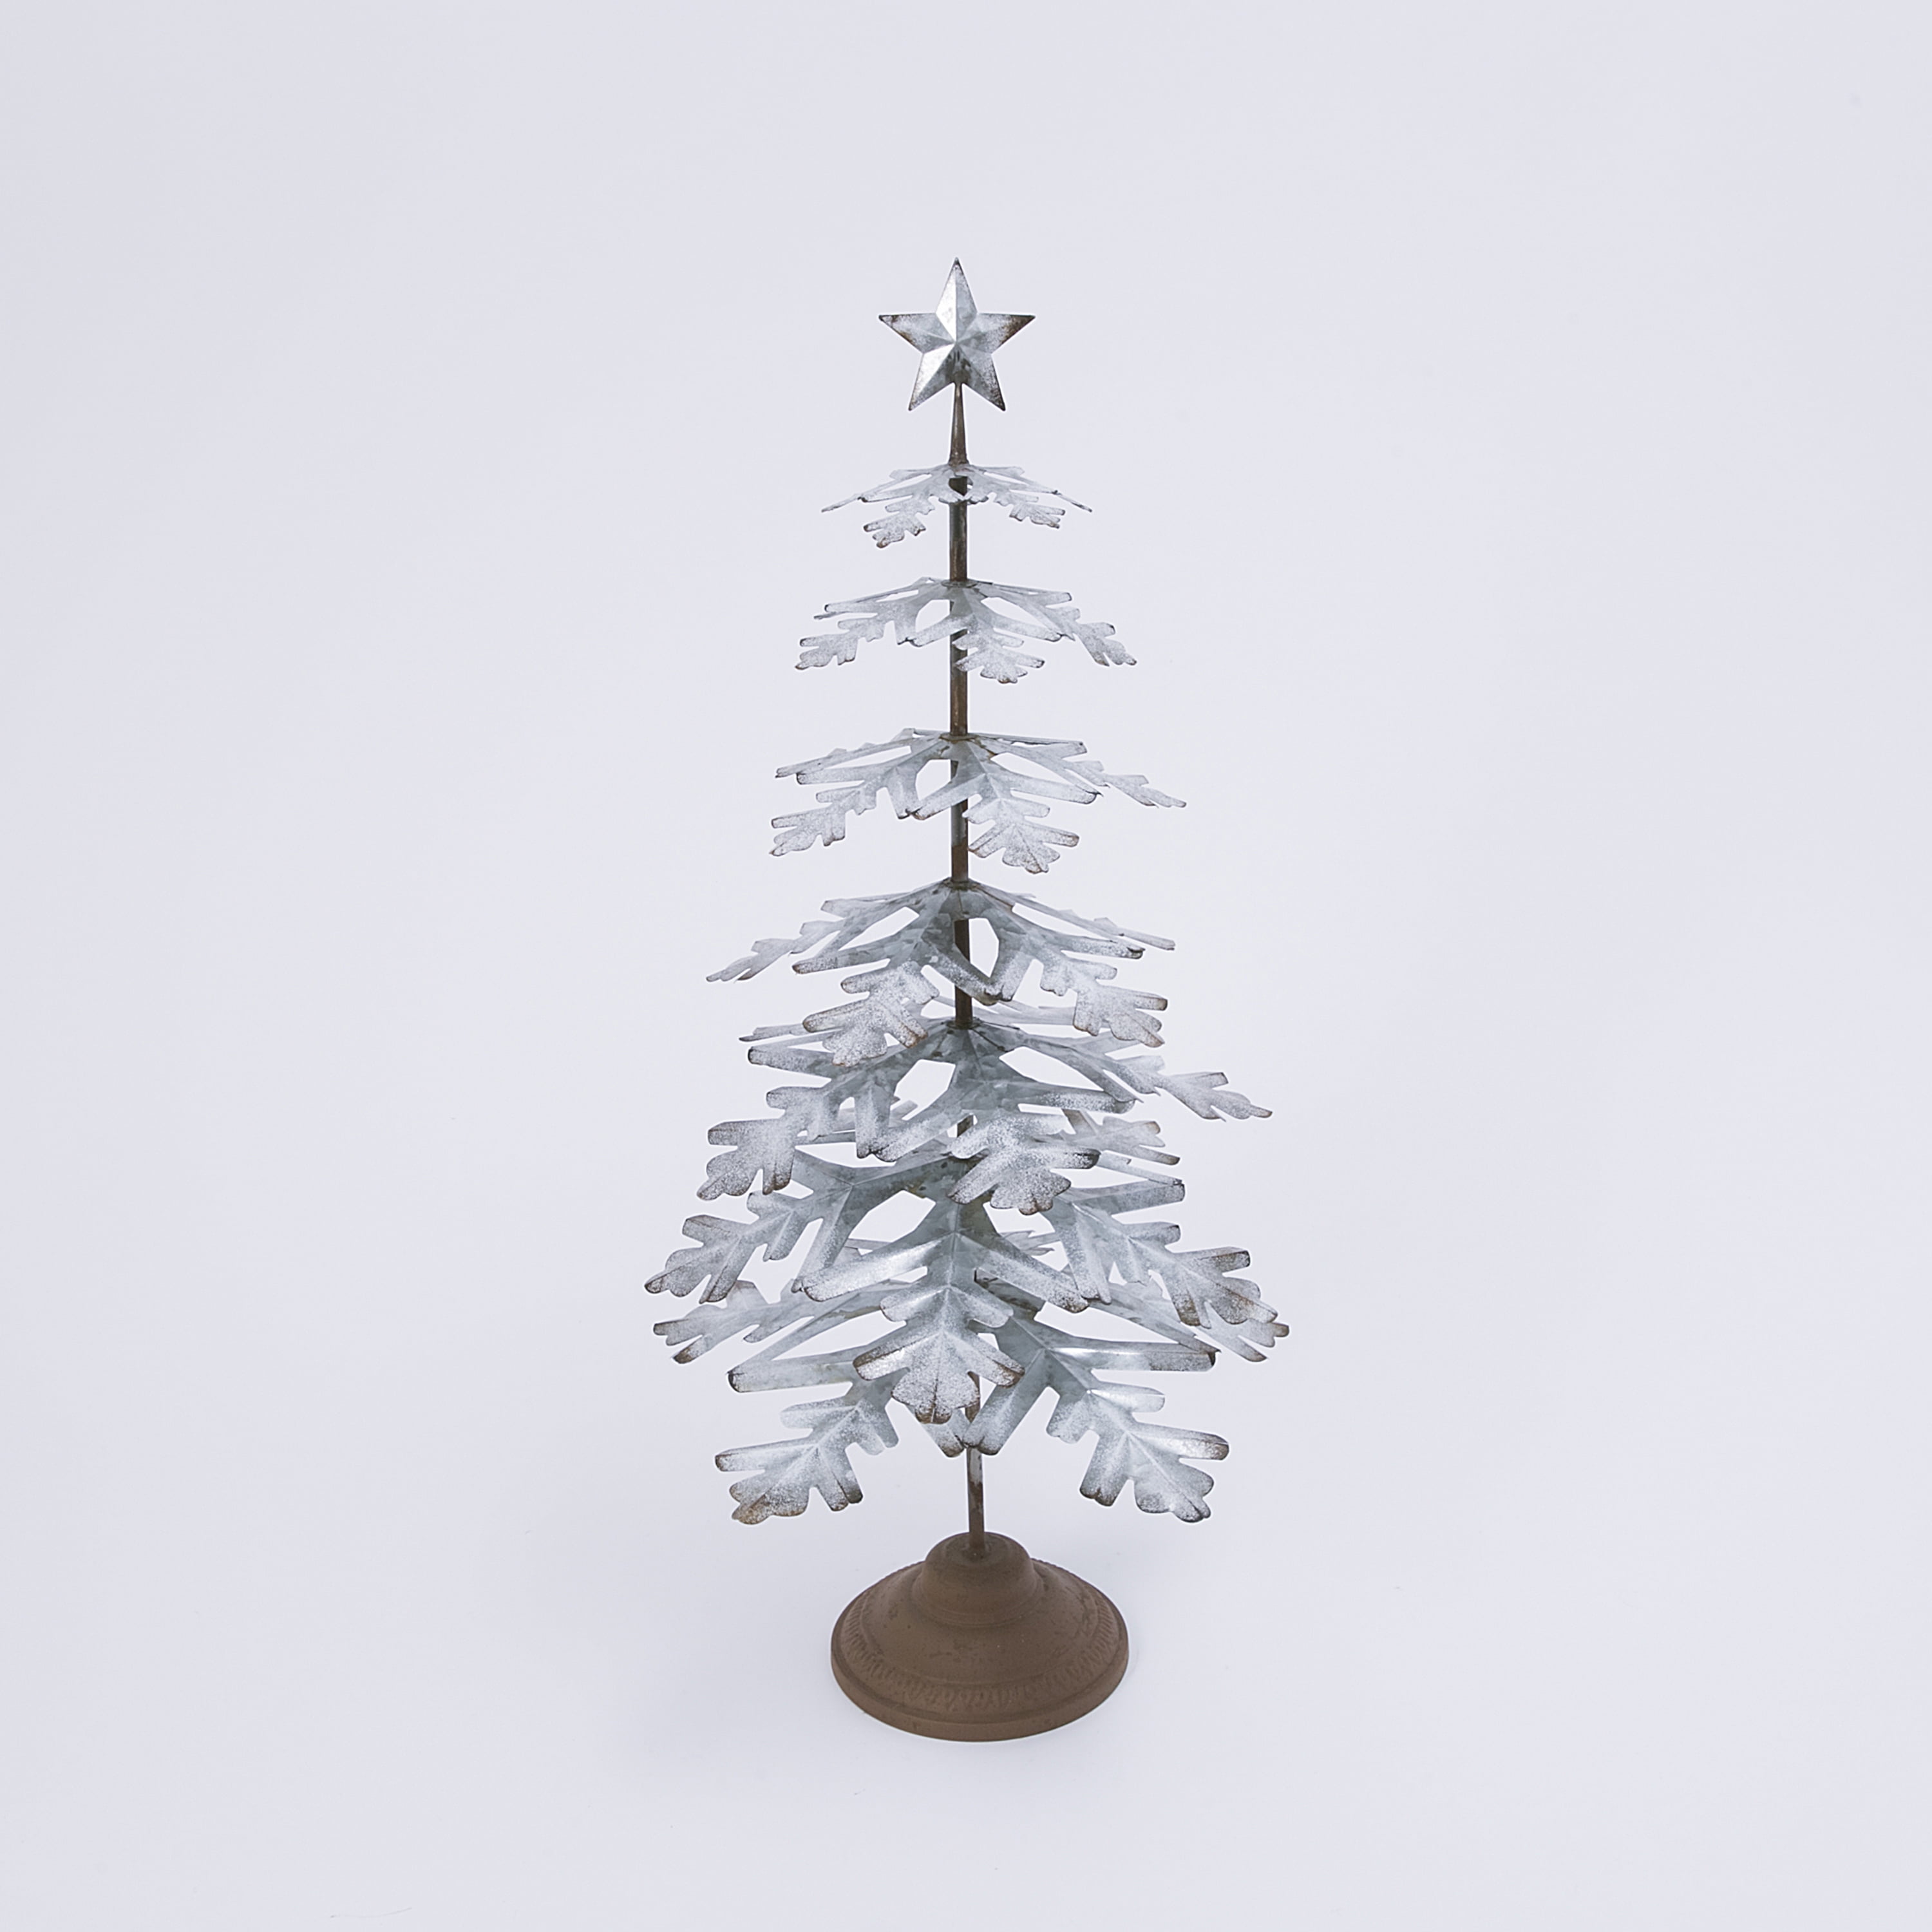 Gerson 33-Inch High Galvanized Metal Tabletop Evergreen Tree with Star ...